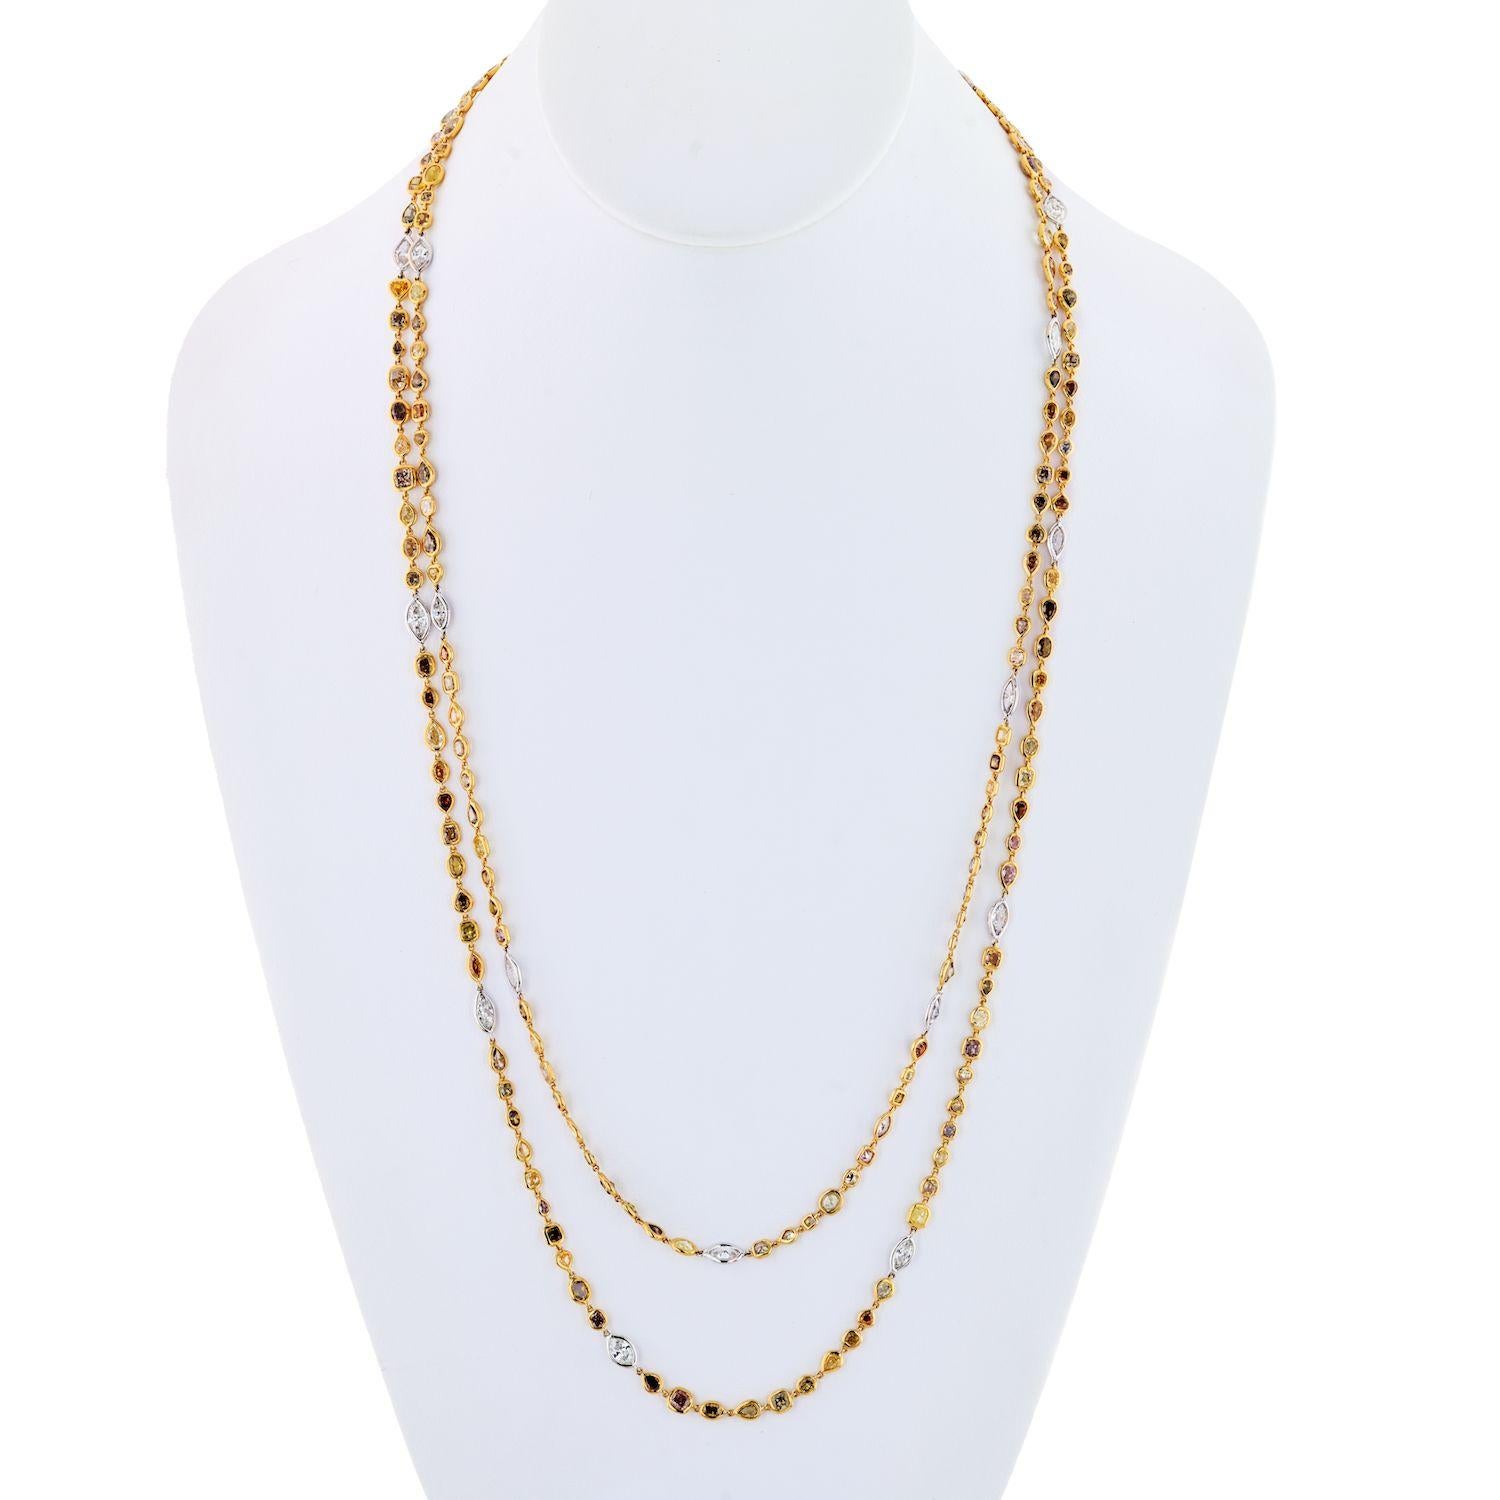 Platinum & 18K Yellow Gold 41 carat Fancy Color And White Diamonds by the Yard Necklace.
Handmade with our in-house jewelers this is a fun and lively necklace featuring 190 natural colored diamonds, and 19 white diamonds.
Total carat weight 36cttw.